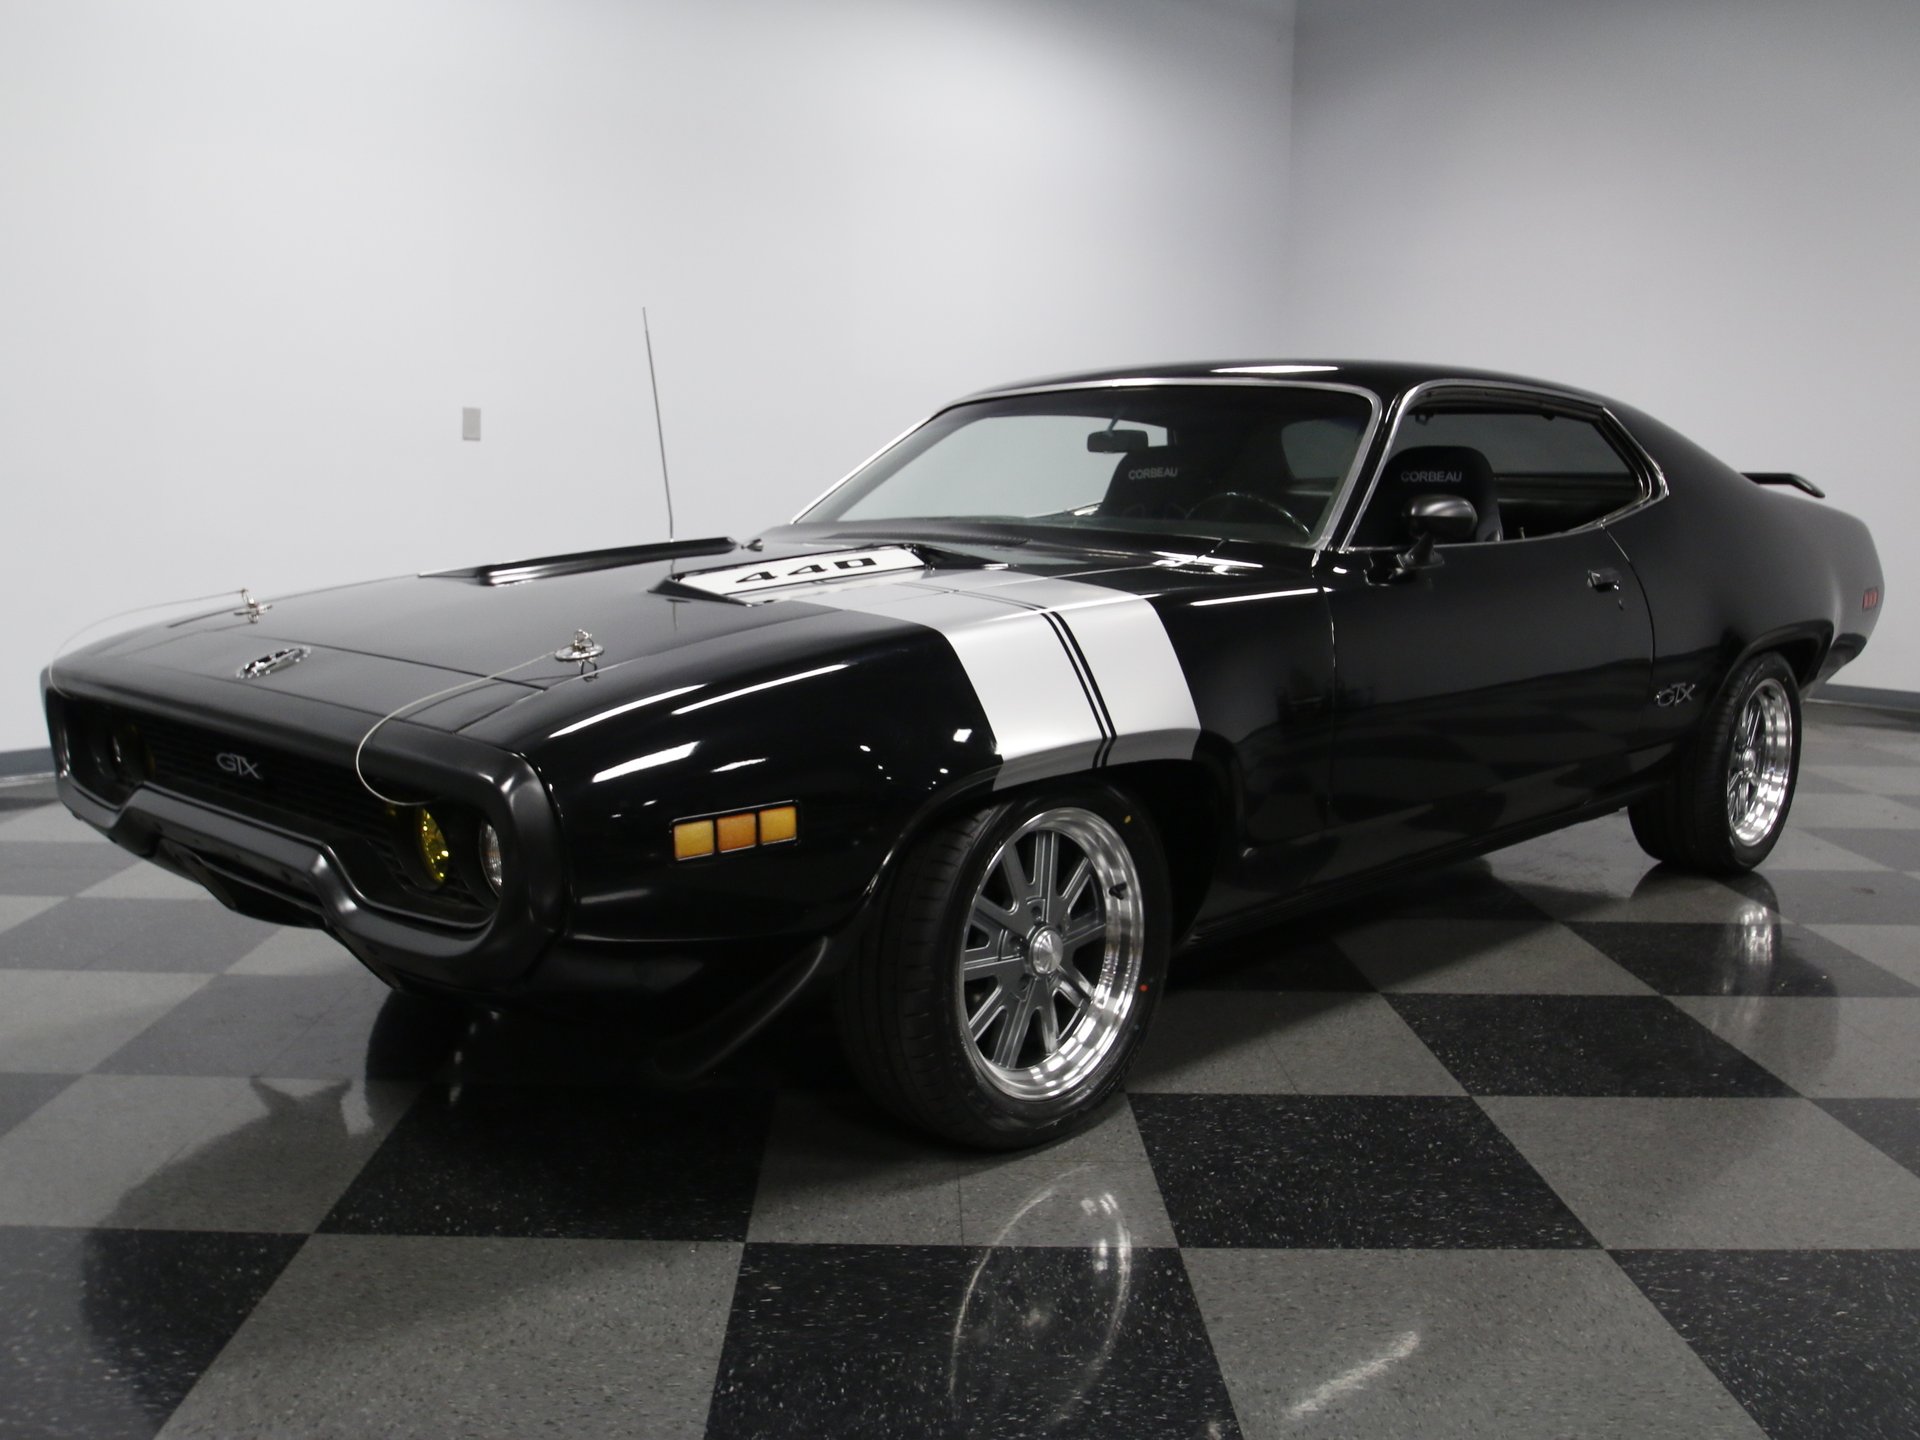 1971 Plymouth GTX | Classic Cars for Sale - Streetside Classics